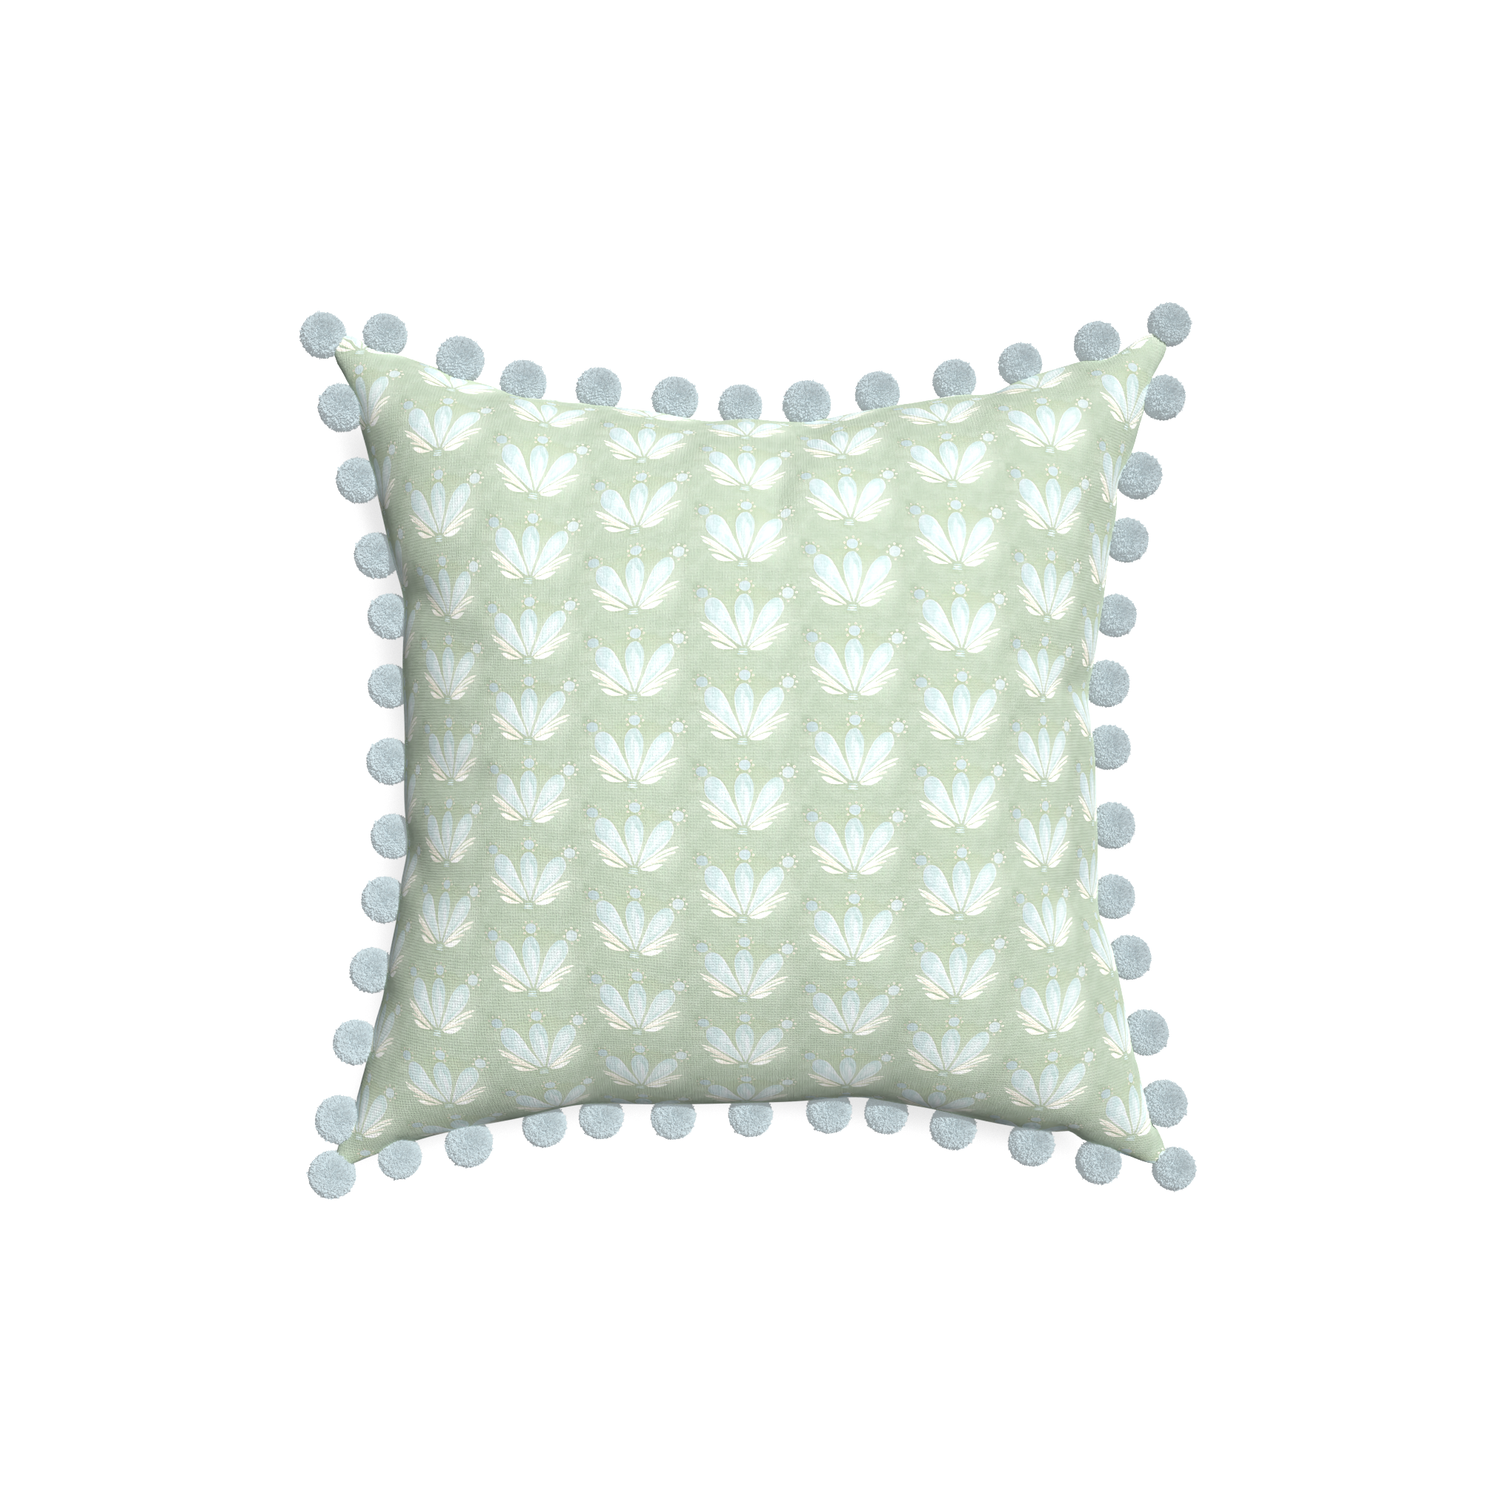 18-square serena sea salt custom blue & green floral drop repeatpillow with powder pom pom on white background